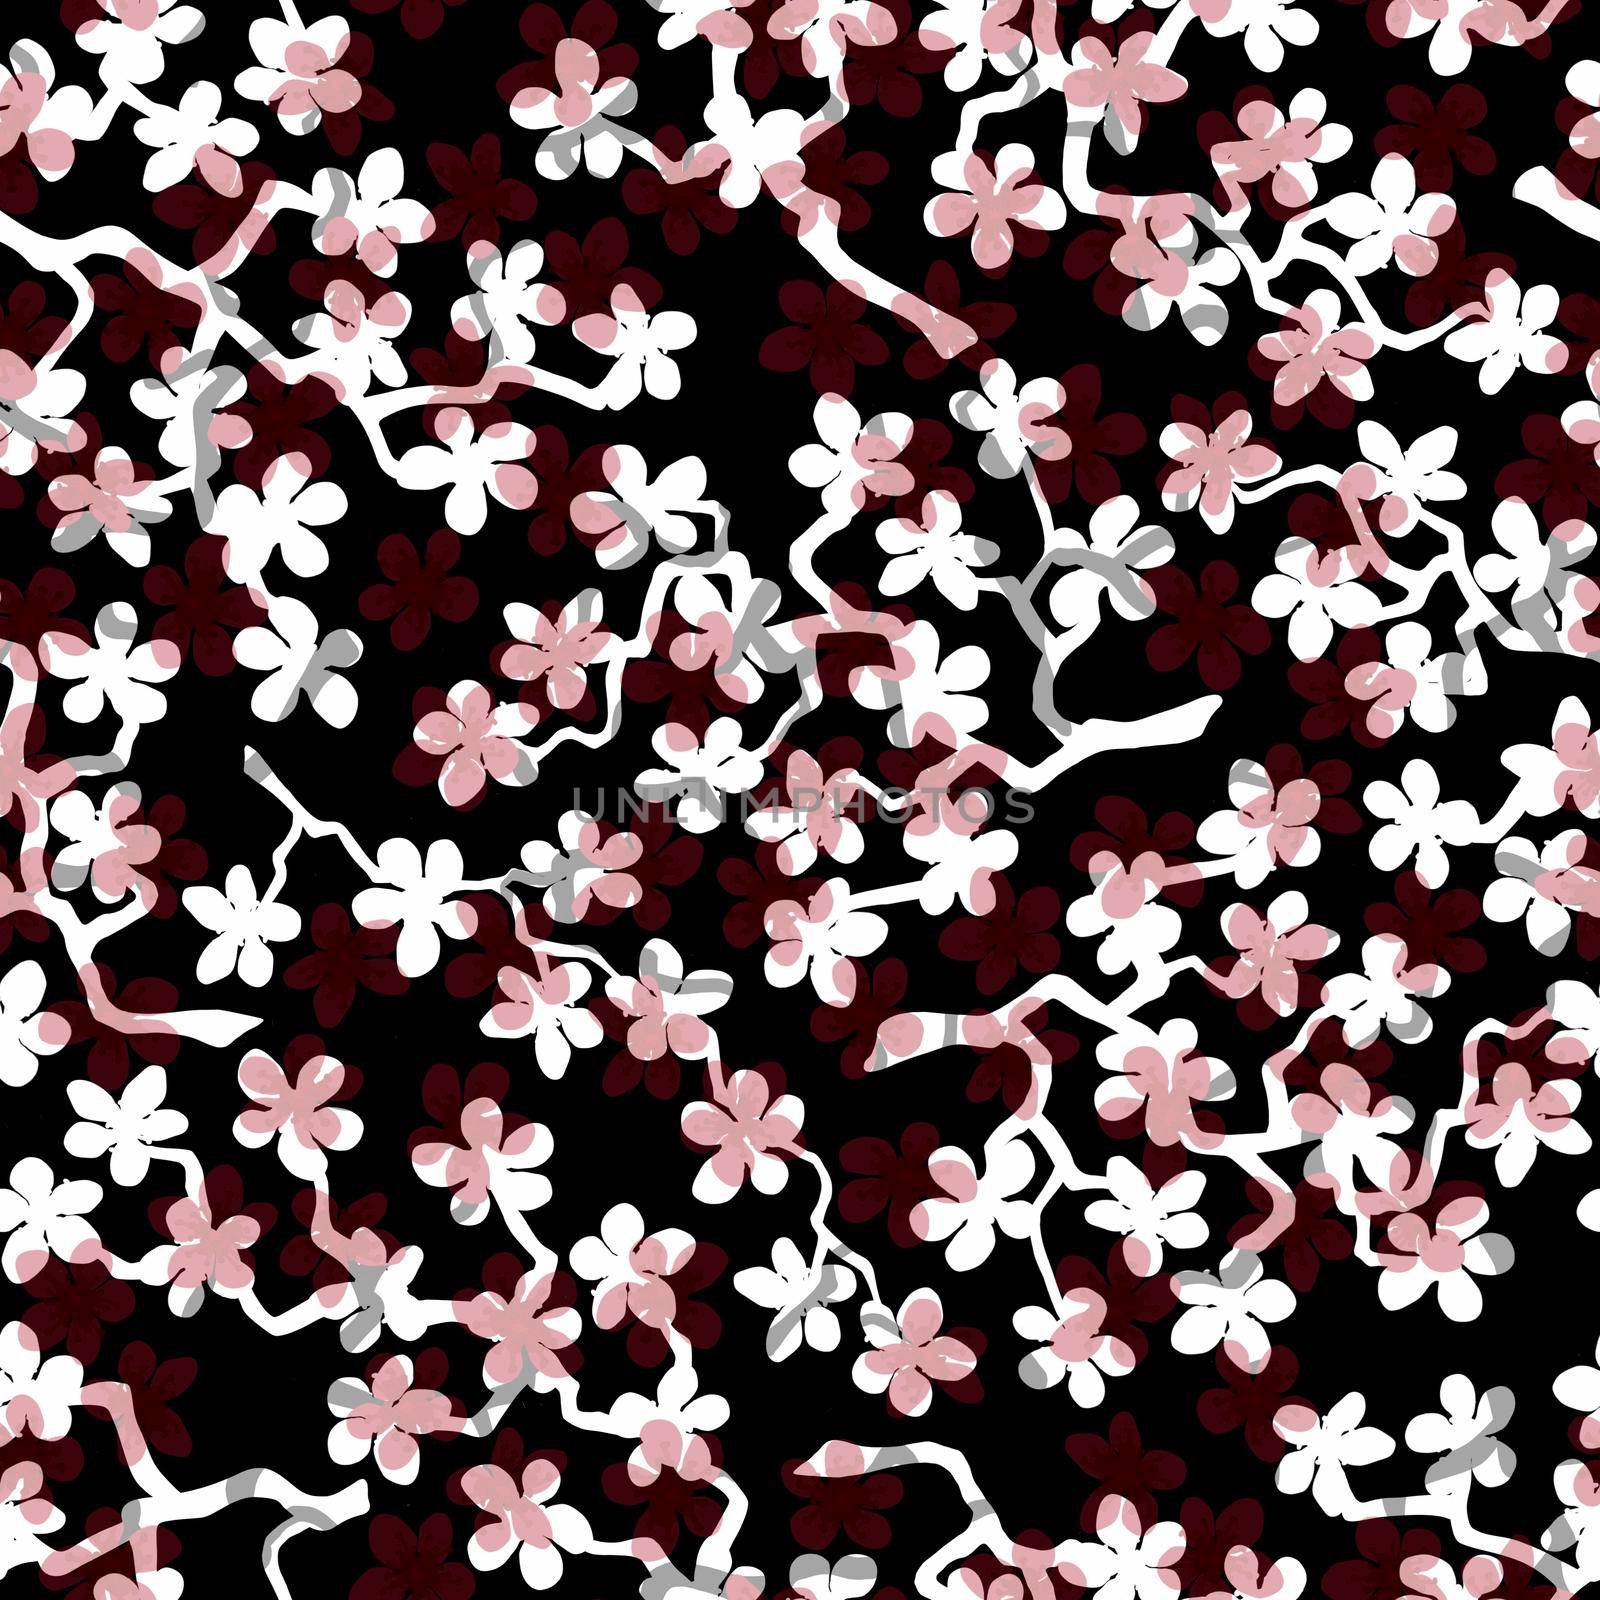 Seamless pattern with blossoming Japanese cherry sakura branches for fabric,packaging,wallpaper,textile decor,design, invitations,gift wrap,manufacturing.Gray and white flowers on black background. by Angelsmoon